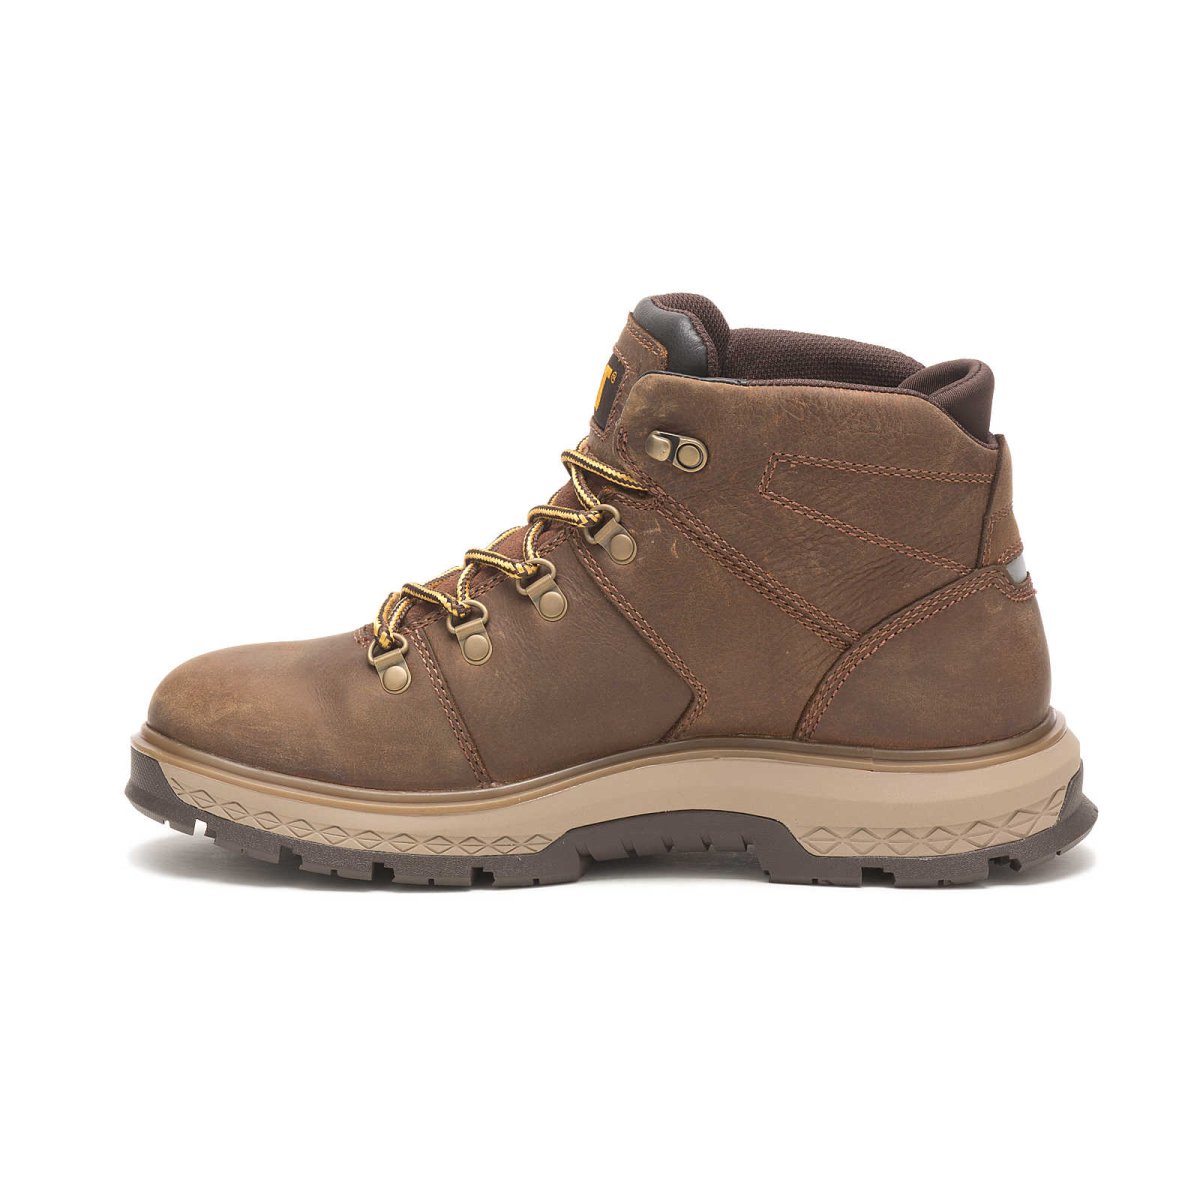 CATERPILLAR EXPOSITION HIKER WATERPROOF ALLOY TOE MEN'S WORK BOOT (P91370) IN PYRAMID - TLW Shoes